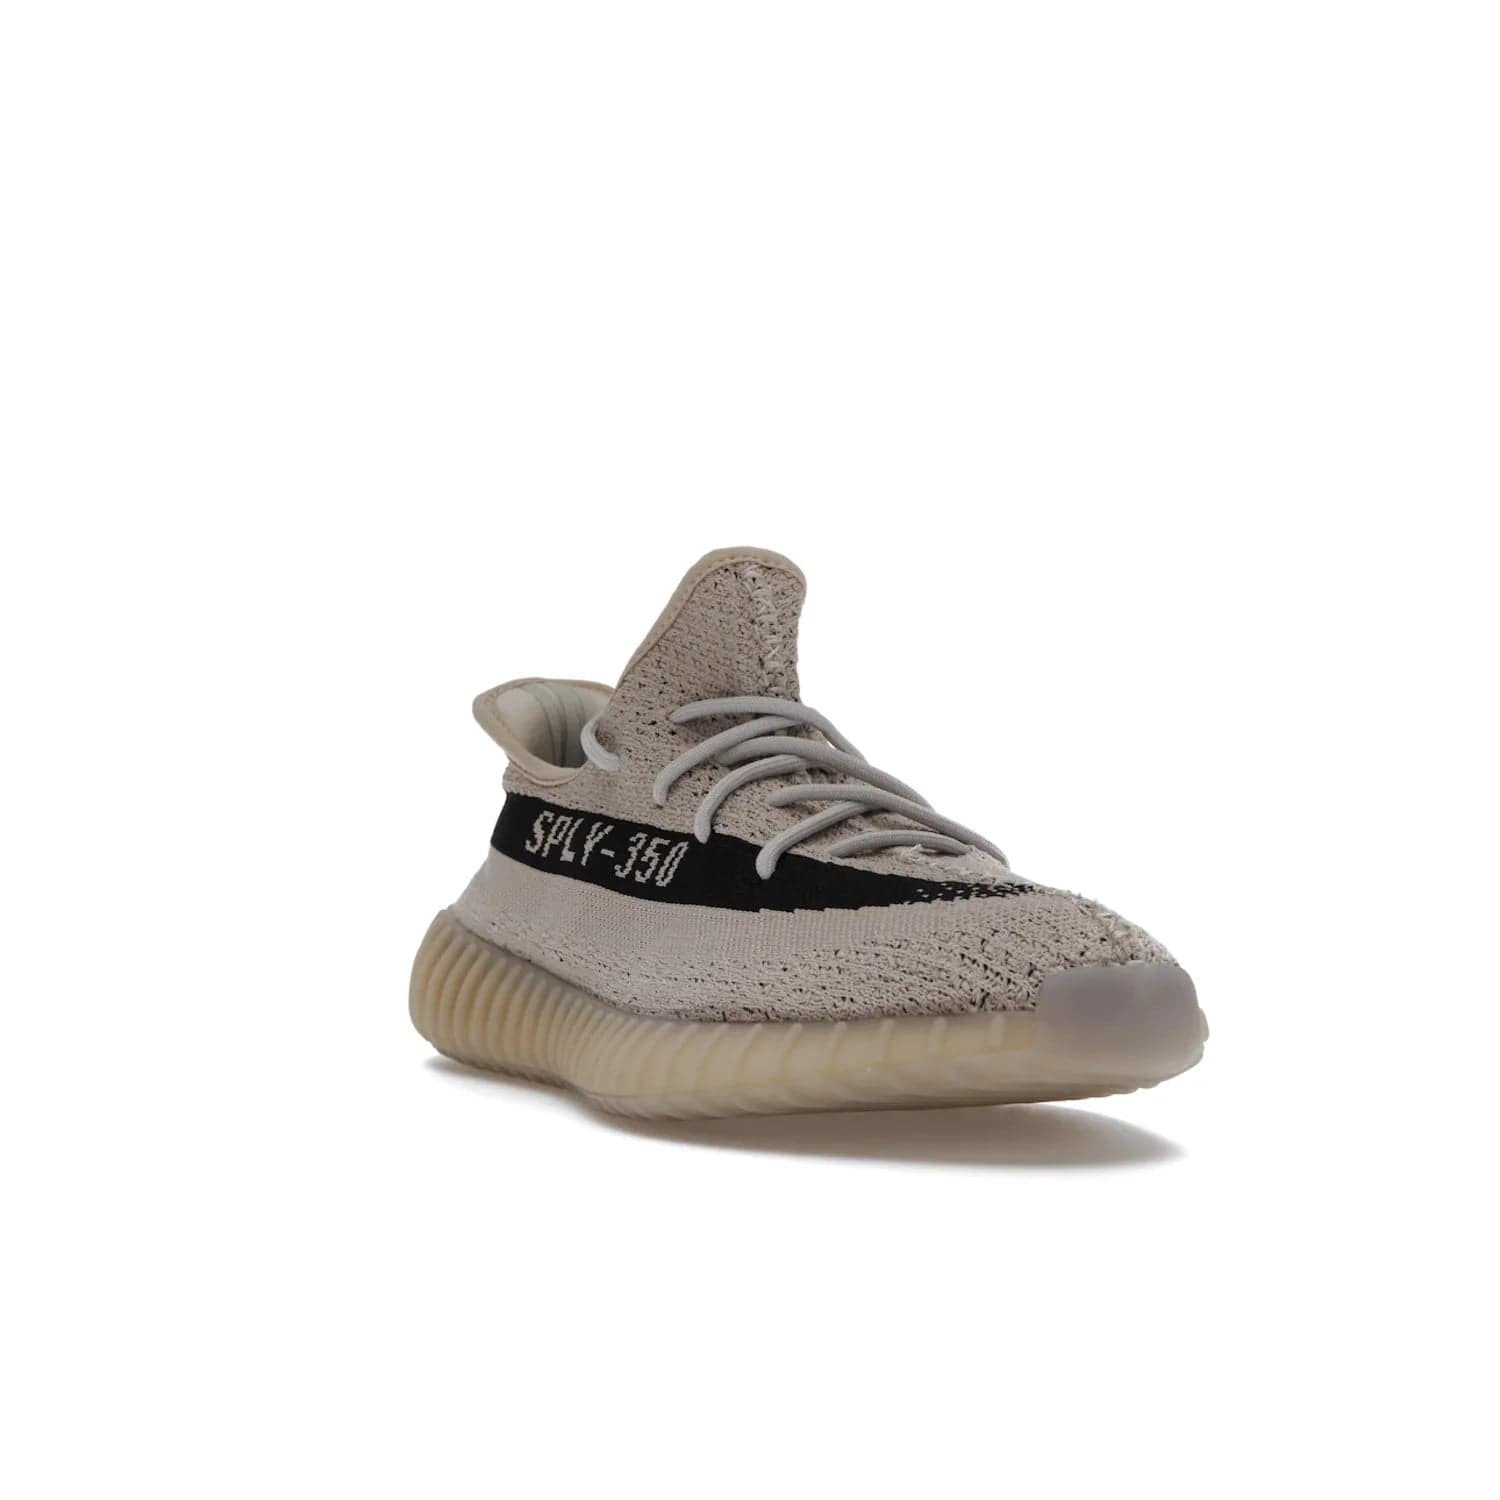 adidas Yeezy Boost 350 V2 Slate - Image 7 - Only at www.BallersClubKickz.com - Adidas Yeezy Boost 350 V2 Slate Core Black Slate featuring Primeknit upper, Boost midsole and semi-translucent TPU cage. Launched on 3/9/2022, retailed at $230.